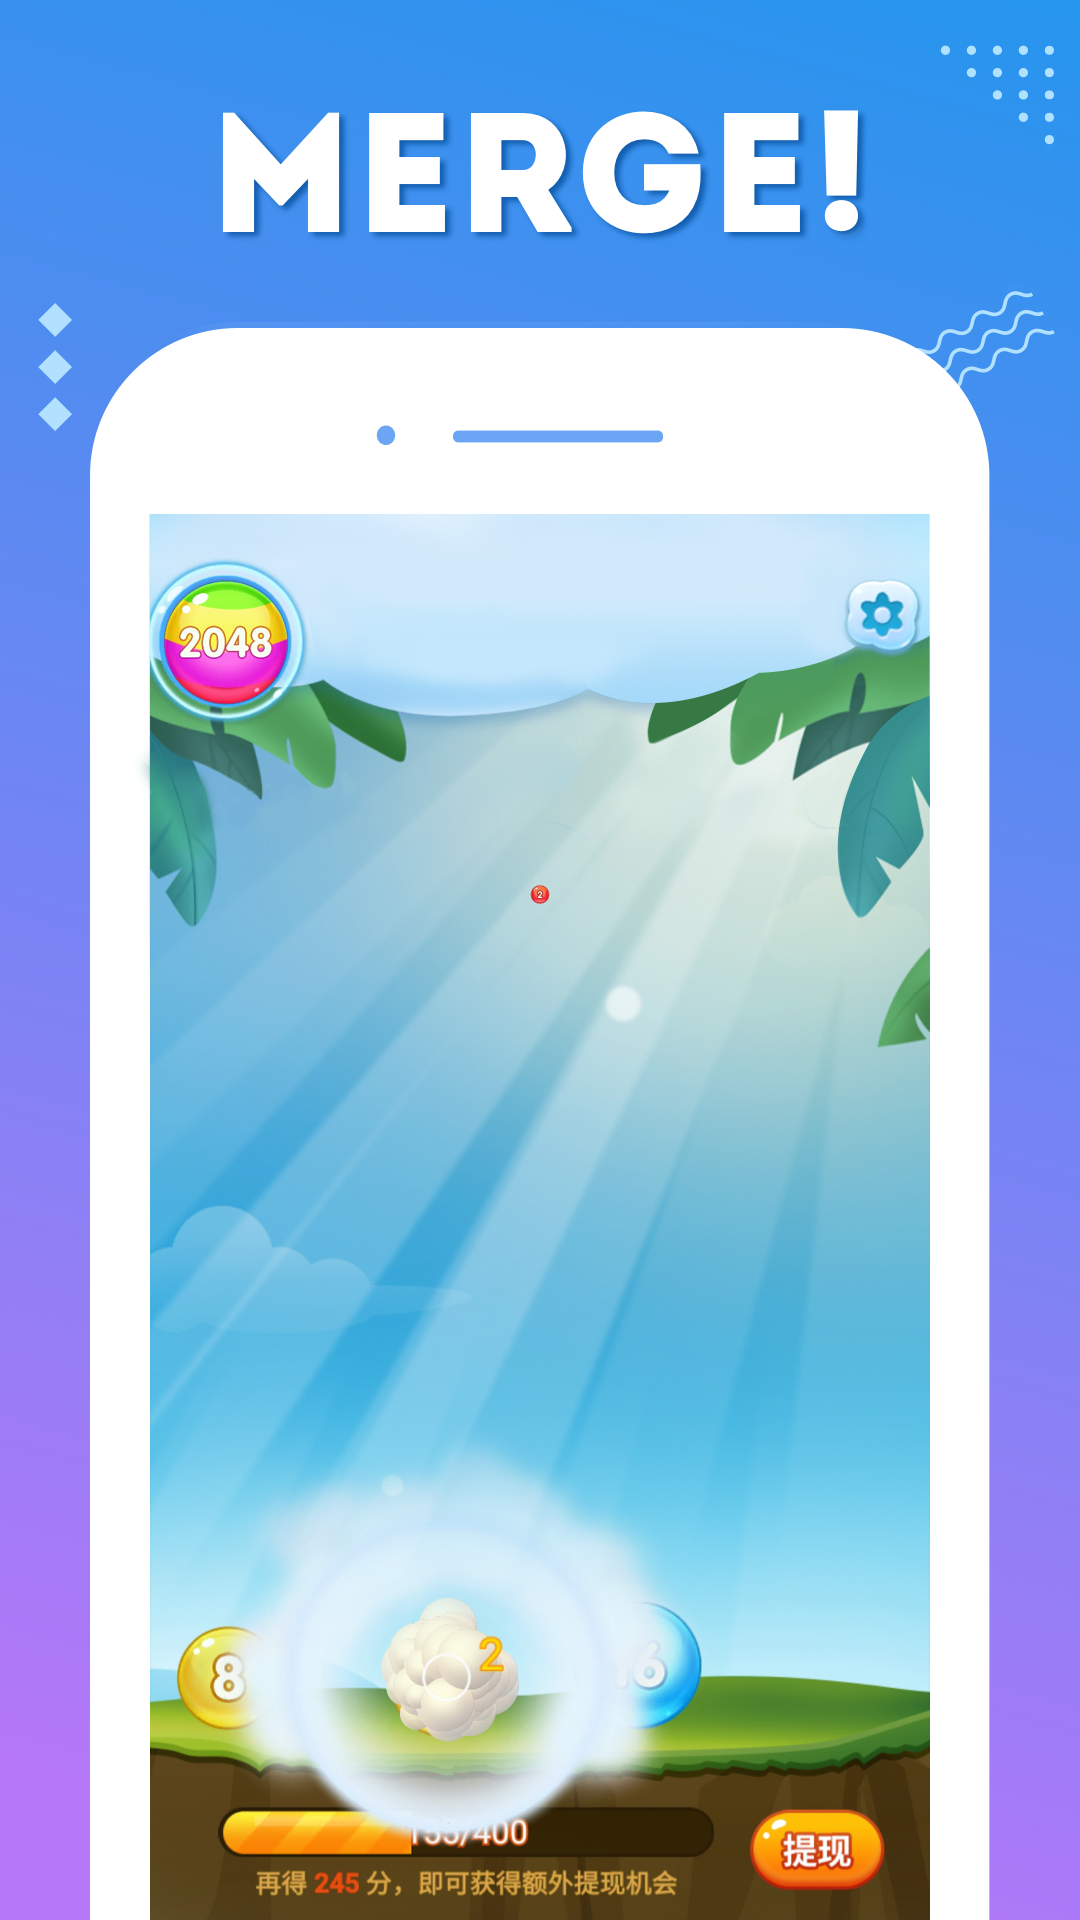 Crazy Ball APK for Android Download